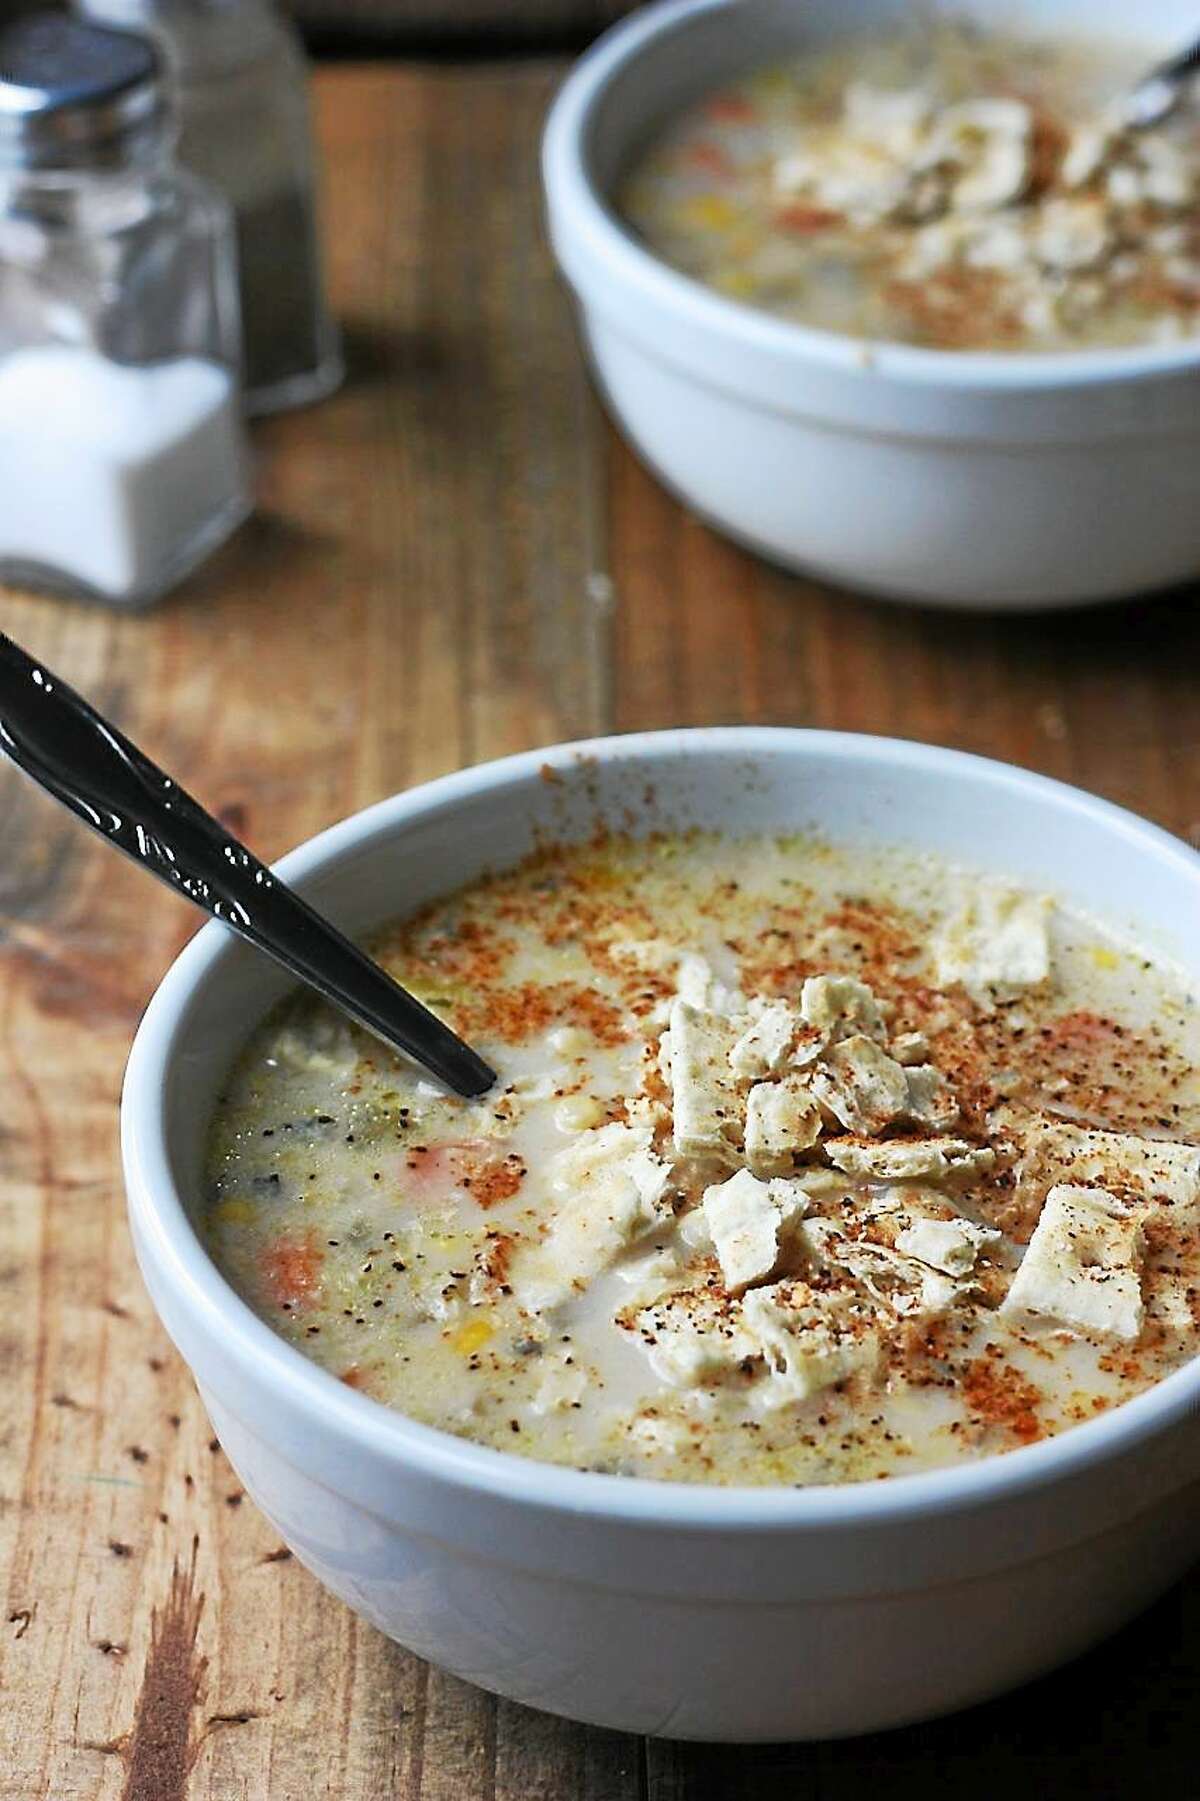 Not only vegan corn chowder flavorful and filling, it’s also much lower in calories and fat than a traditional chowder. Try out this I.O.N. Restaurant recipe for those cold winter days.